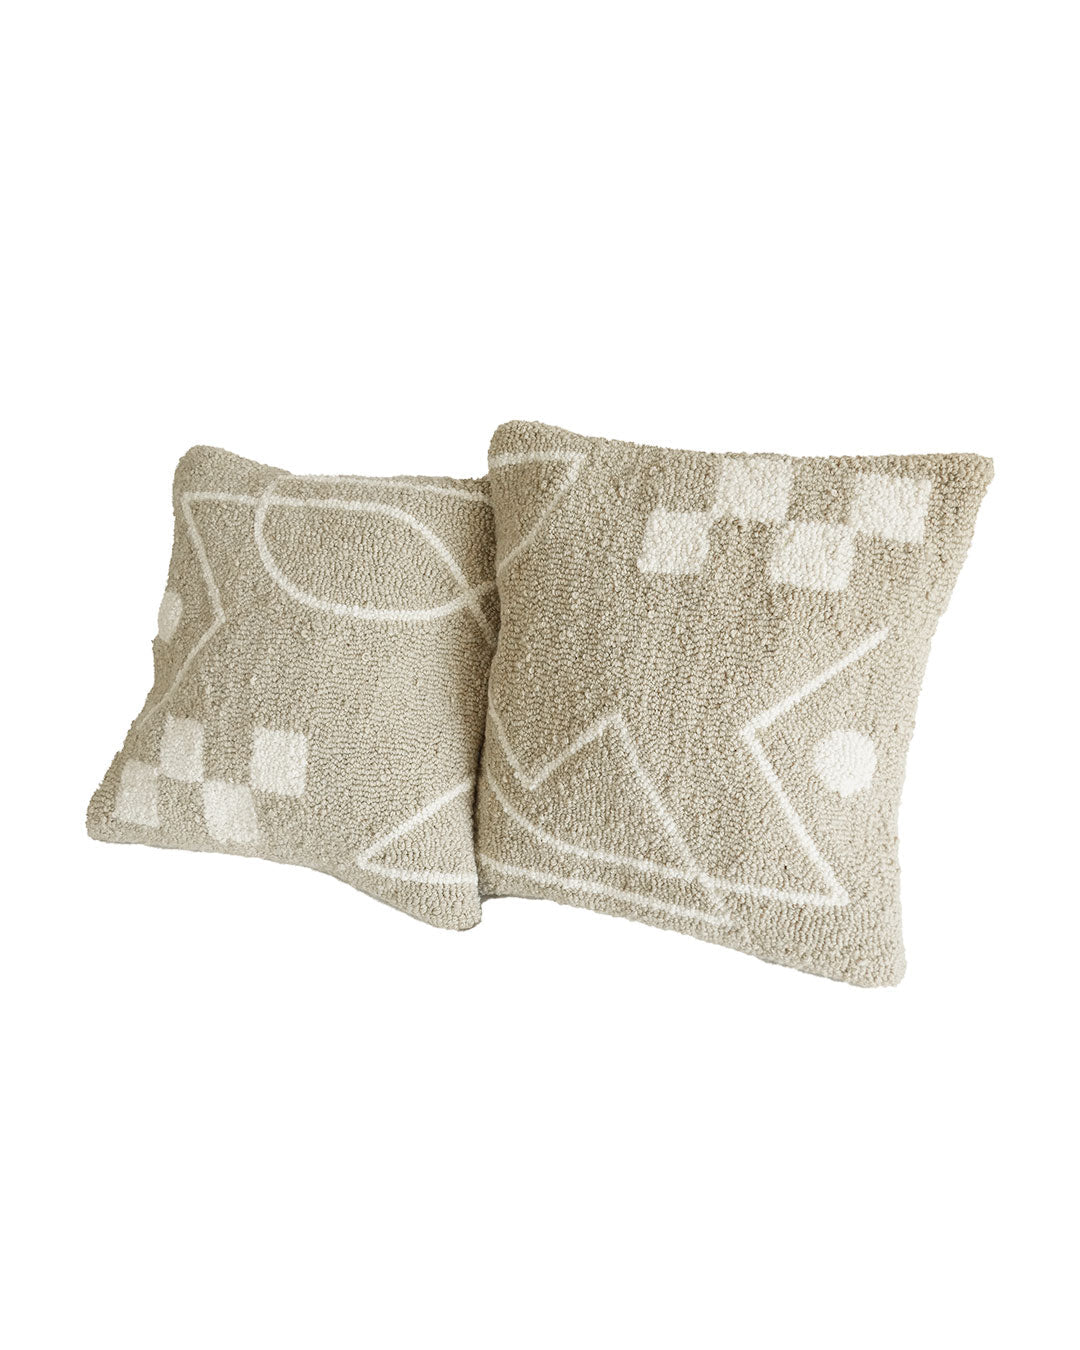 Pair Tufted Cushion Covers - Ito